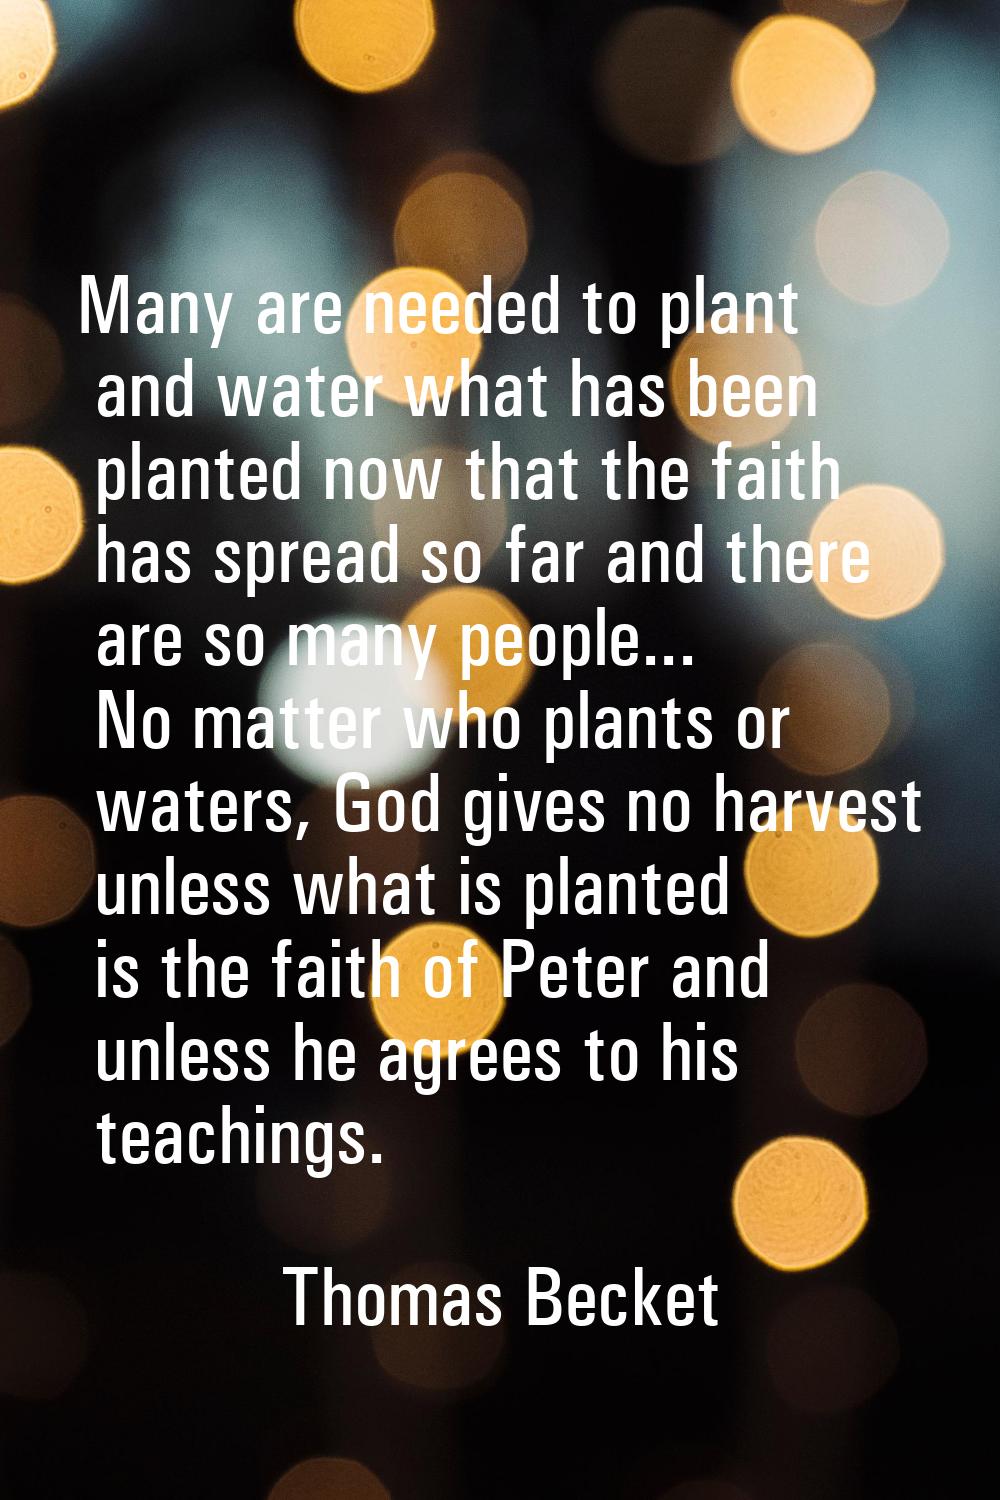 Many are needed to plant and water what has been planted now that the faith has spread so far and t